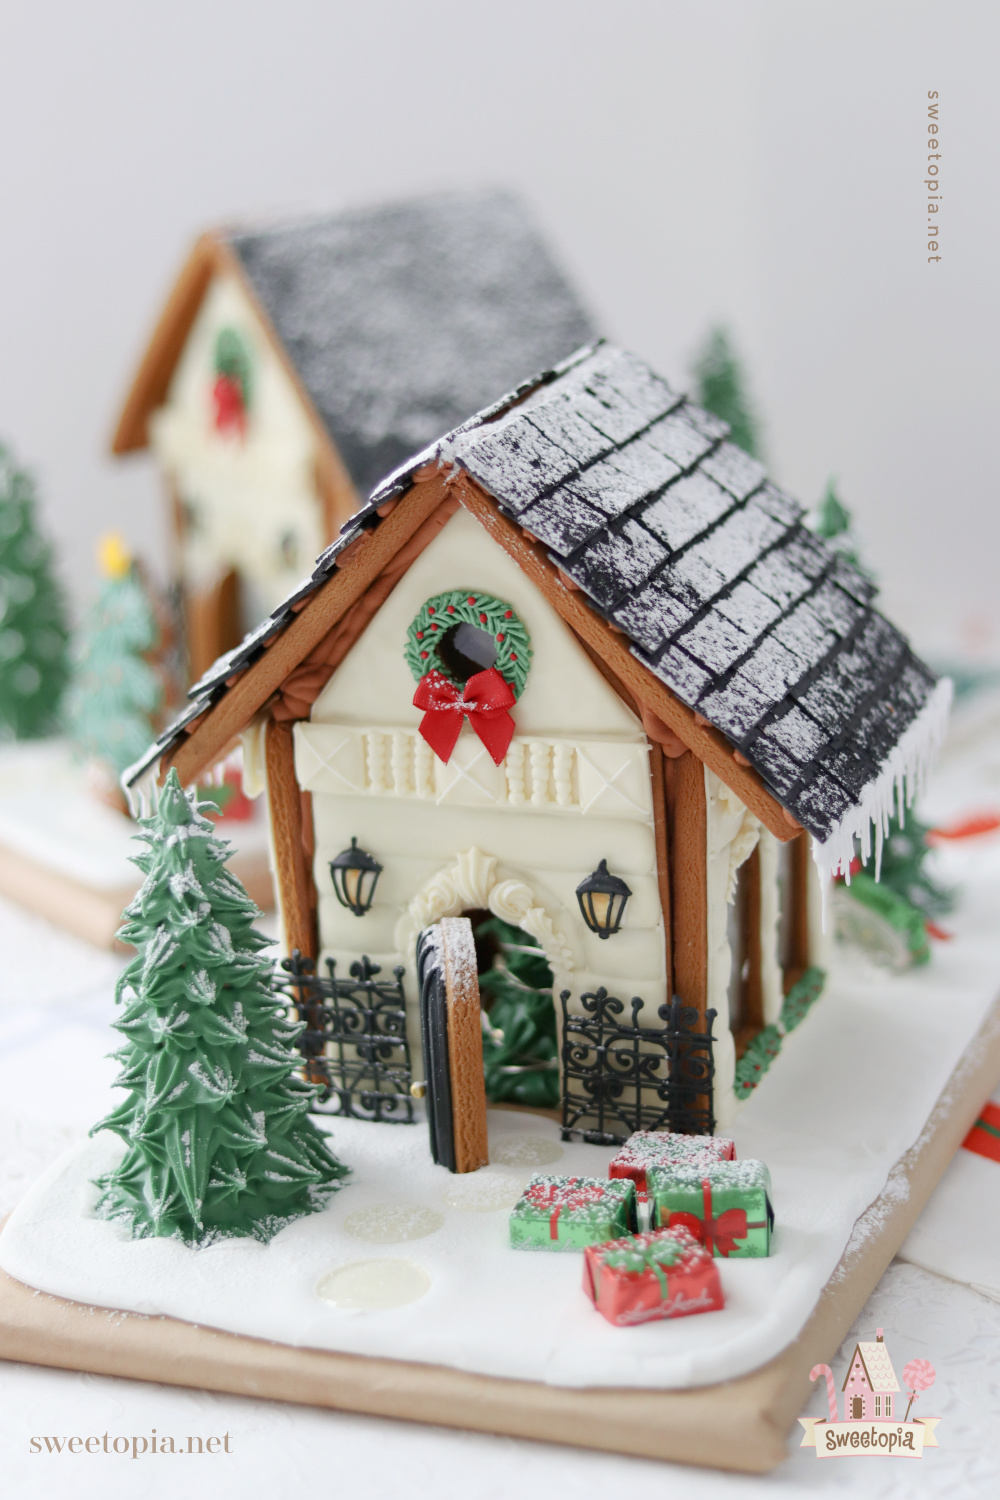 Gingerbread Christmas Cottage Recipe: How to Make It